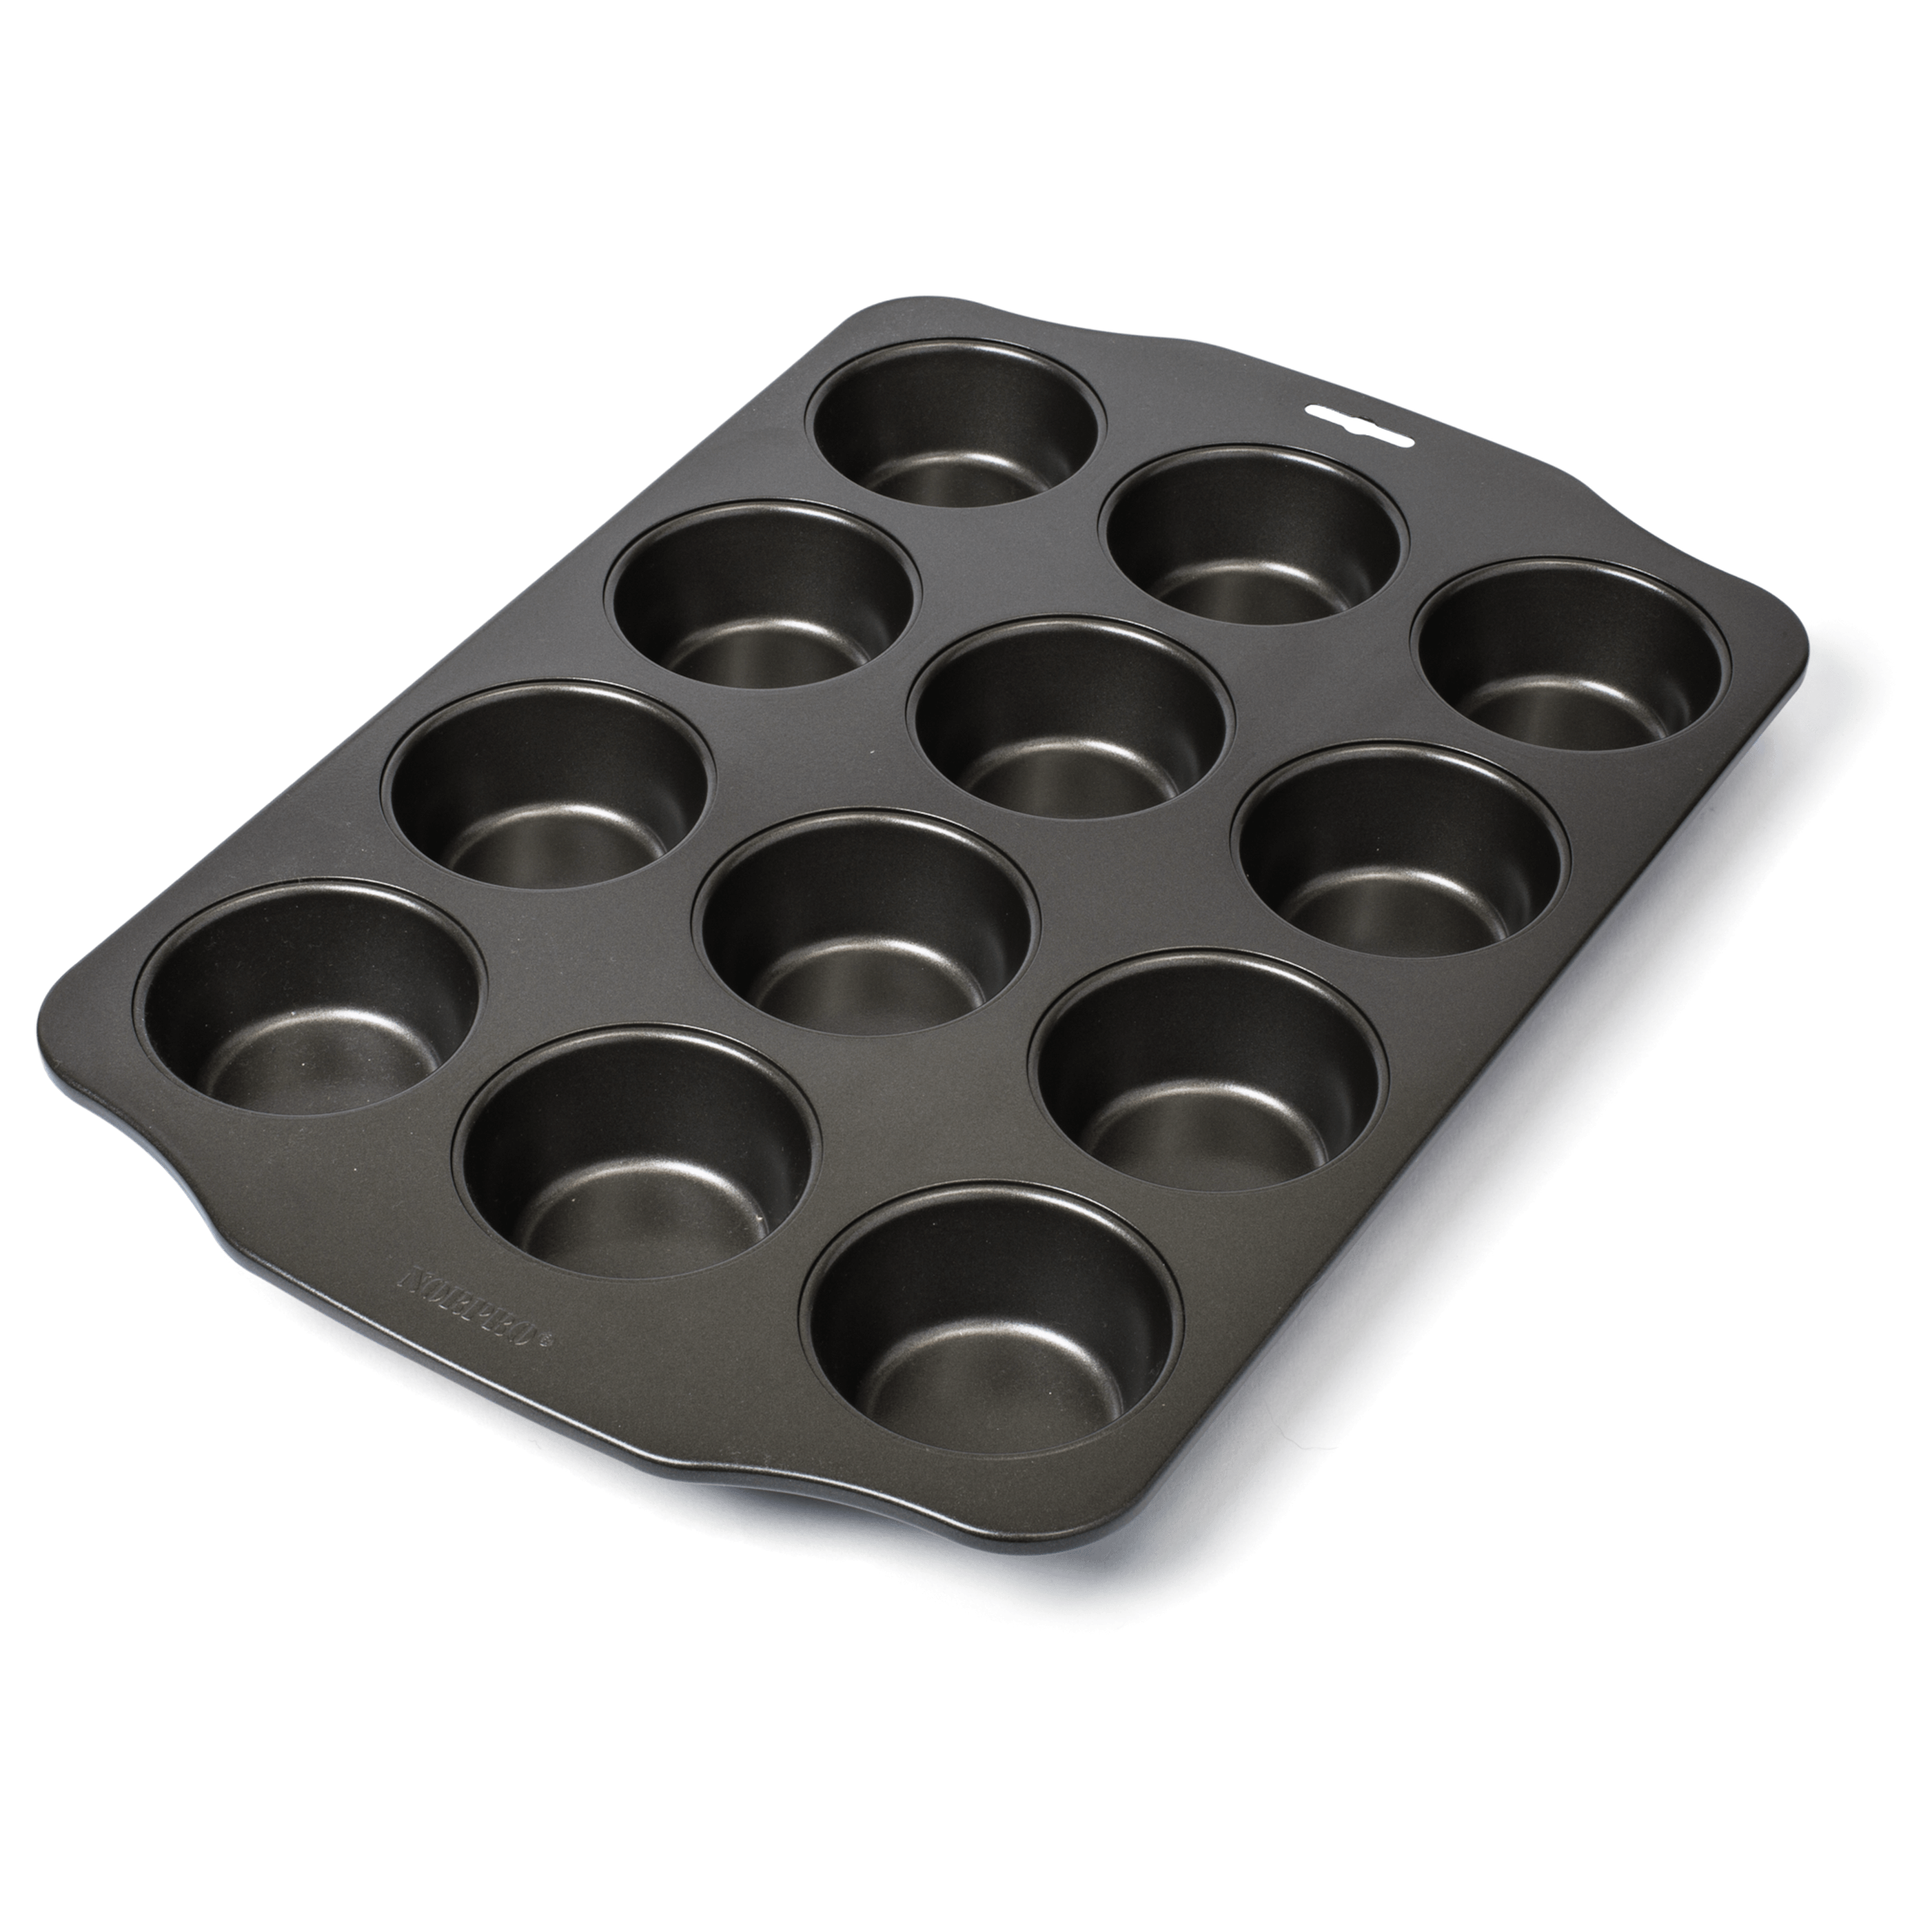 America's Test Kitchen equipment review: muffin tins